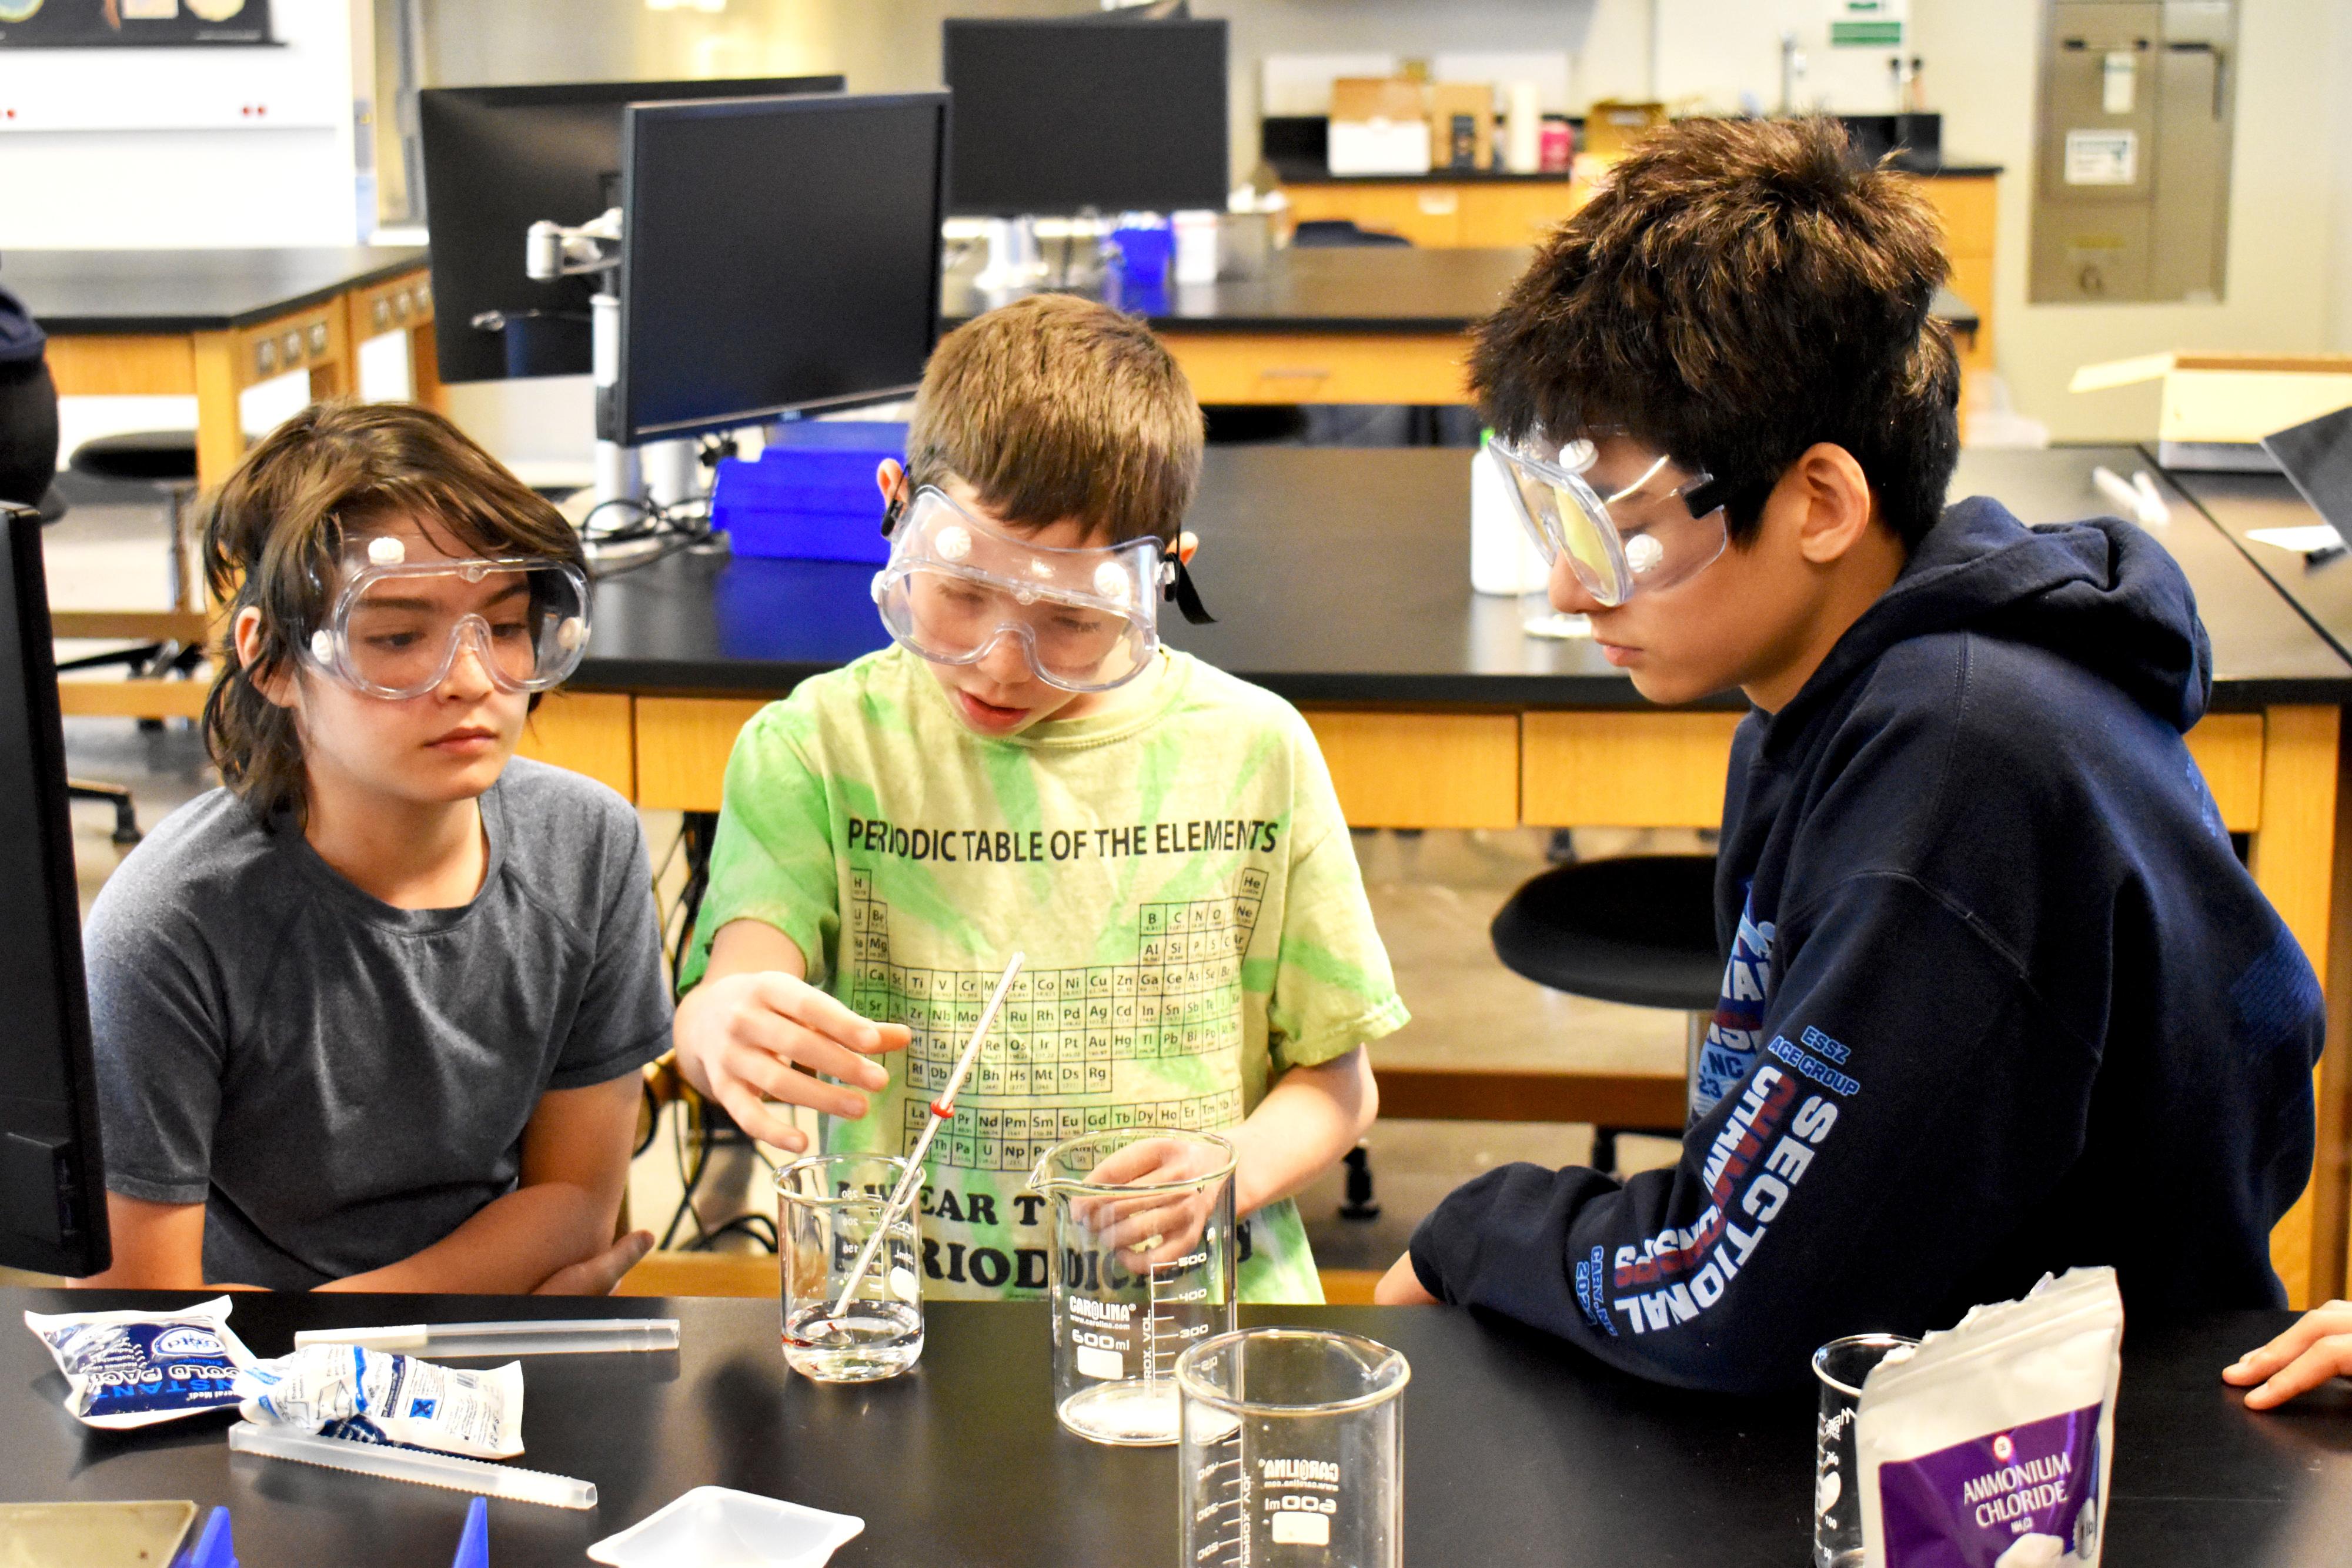 Middle school children doing activities in a science lab.